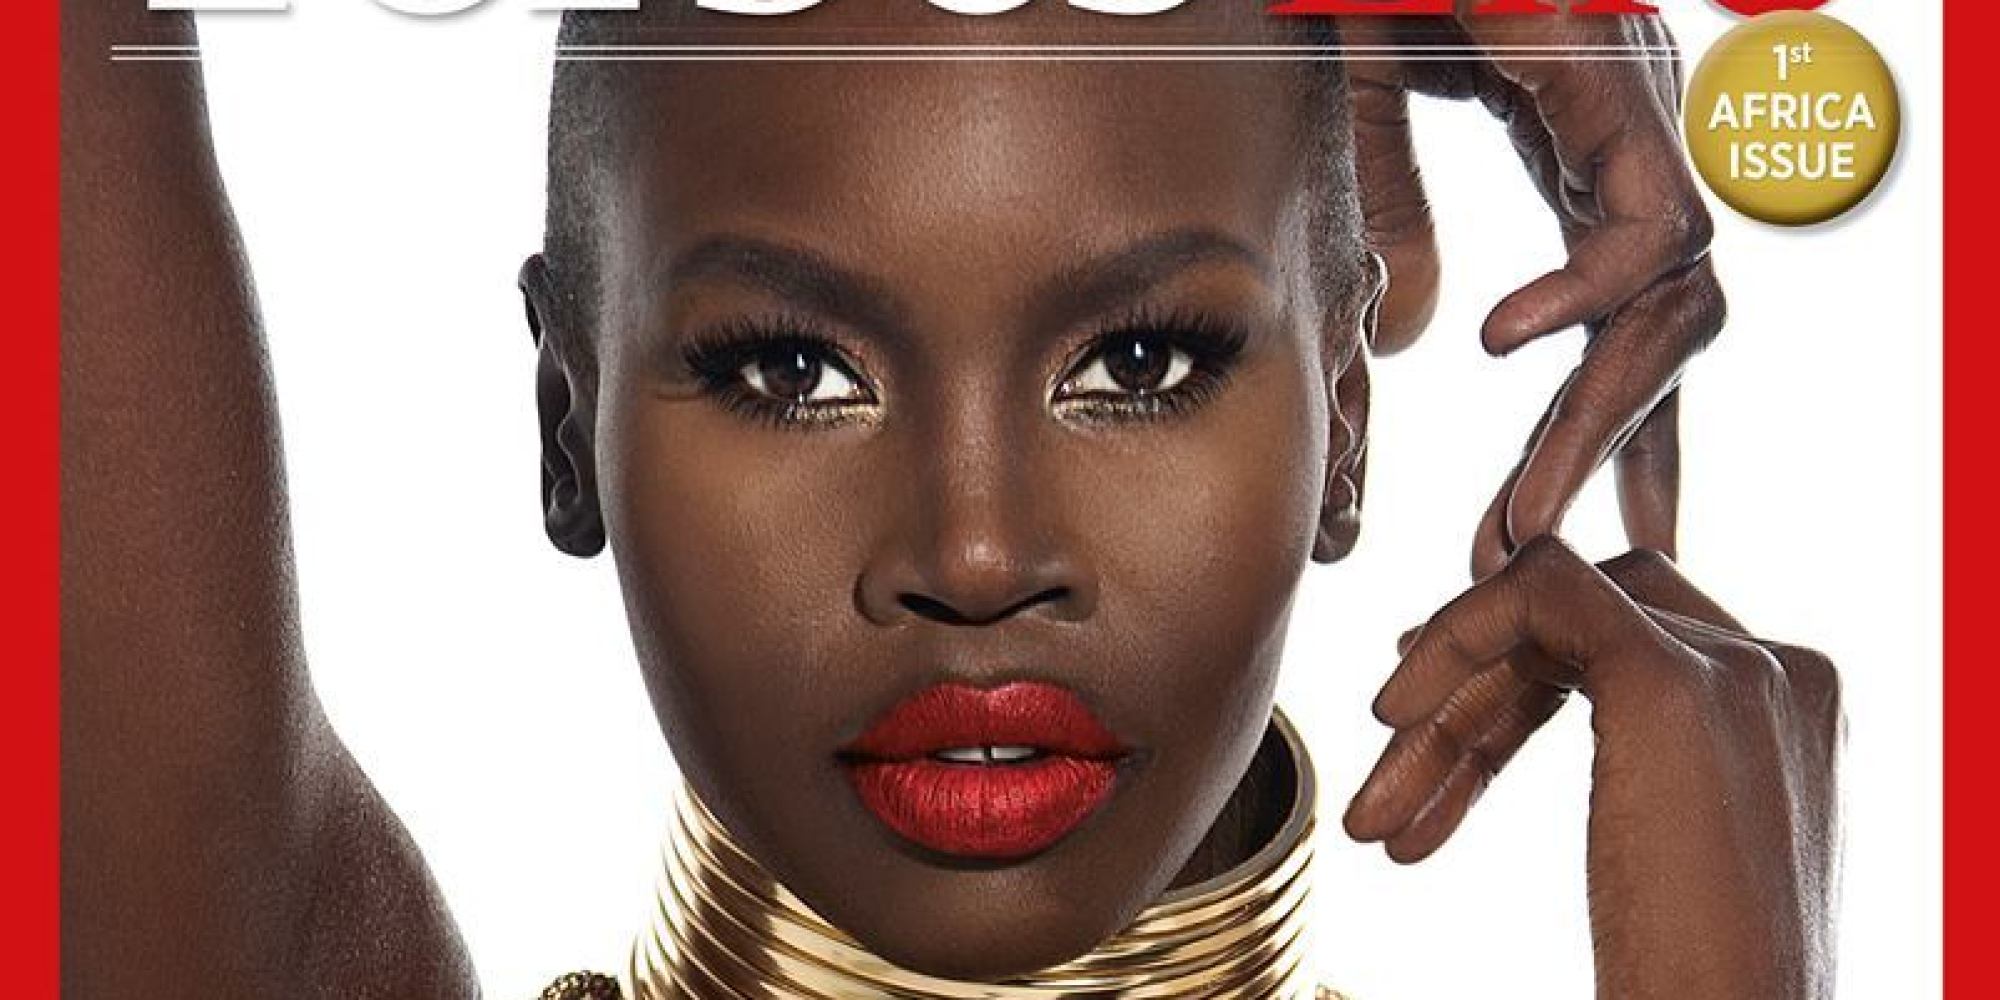 forbes-africa-turns-2-celebrates-with-new-project-supermodel-alek-wek